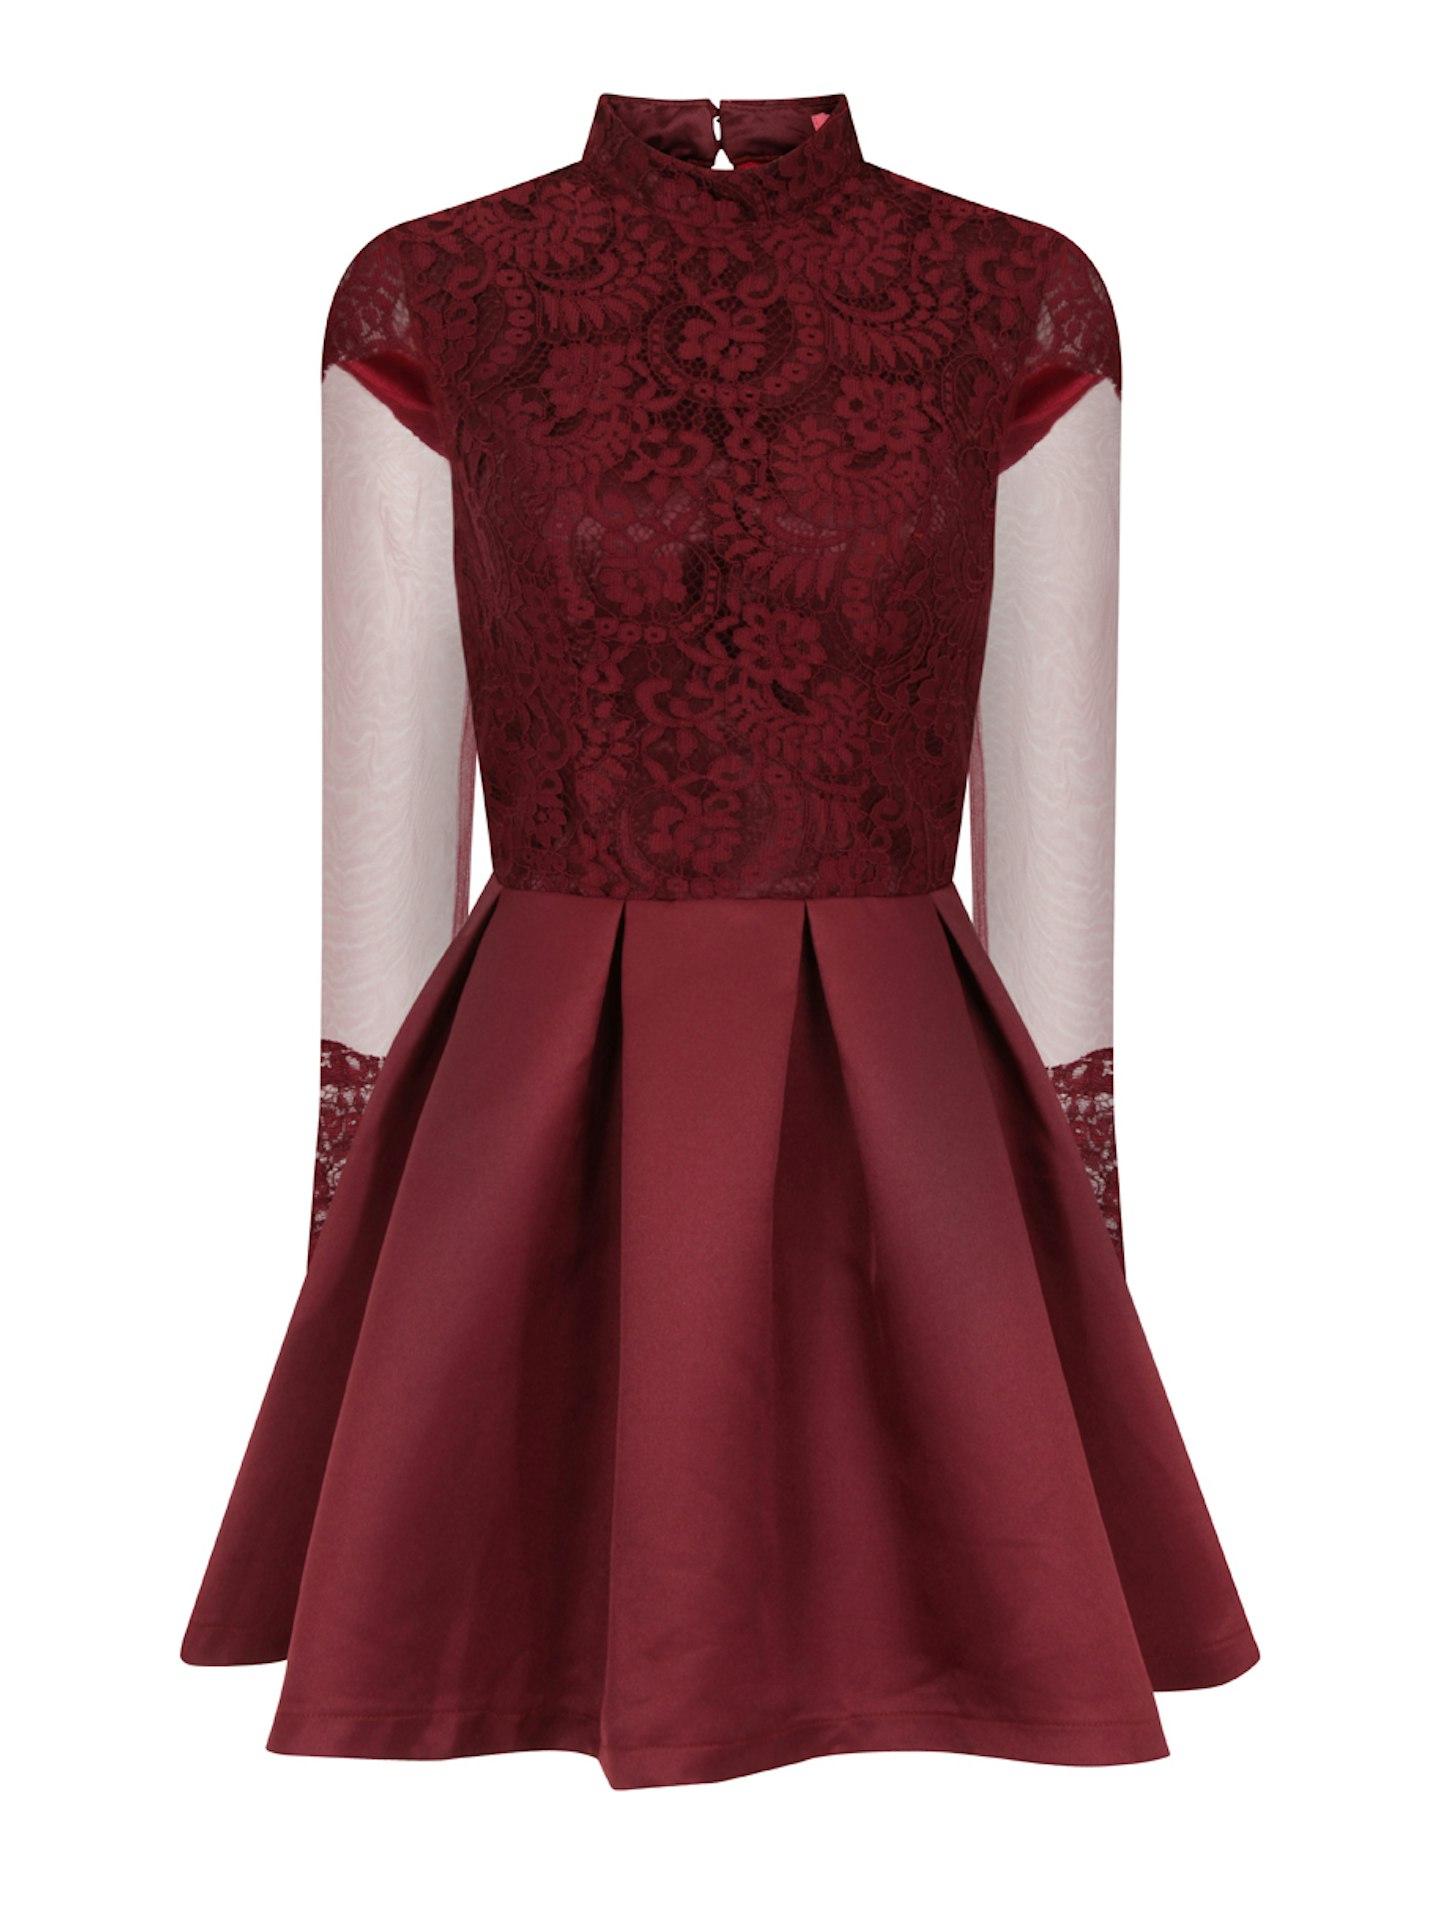 Try different colours like this wine-coloured dress from Chi Chi London